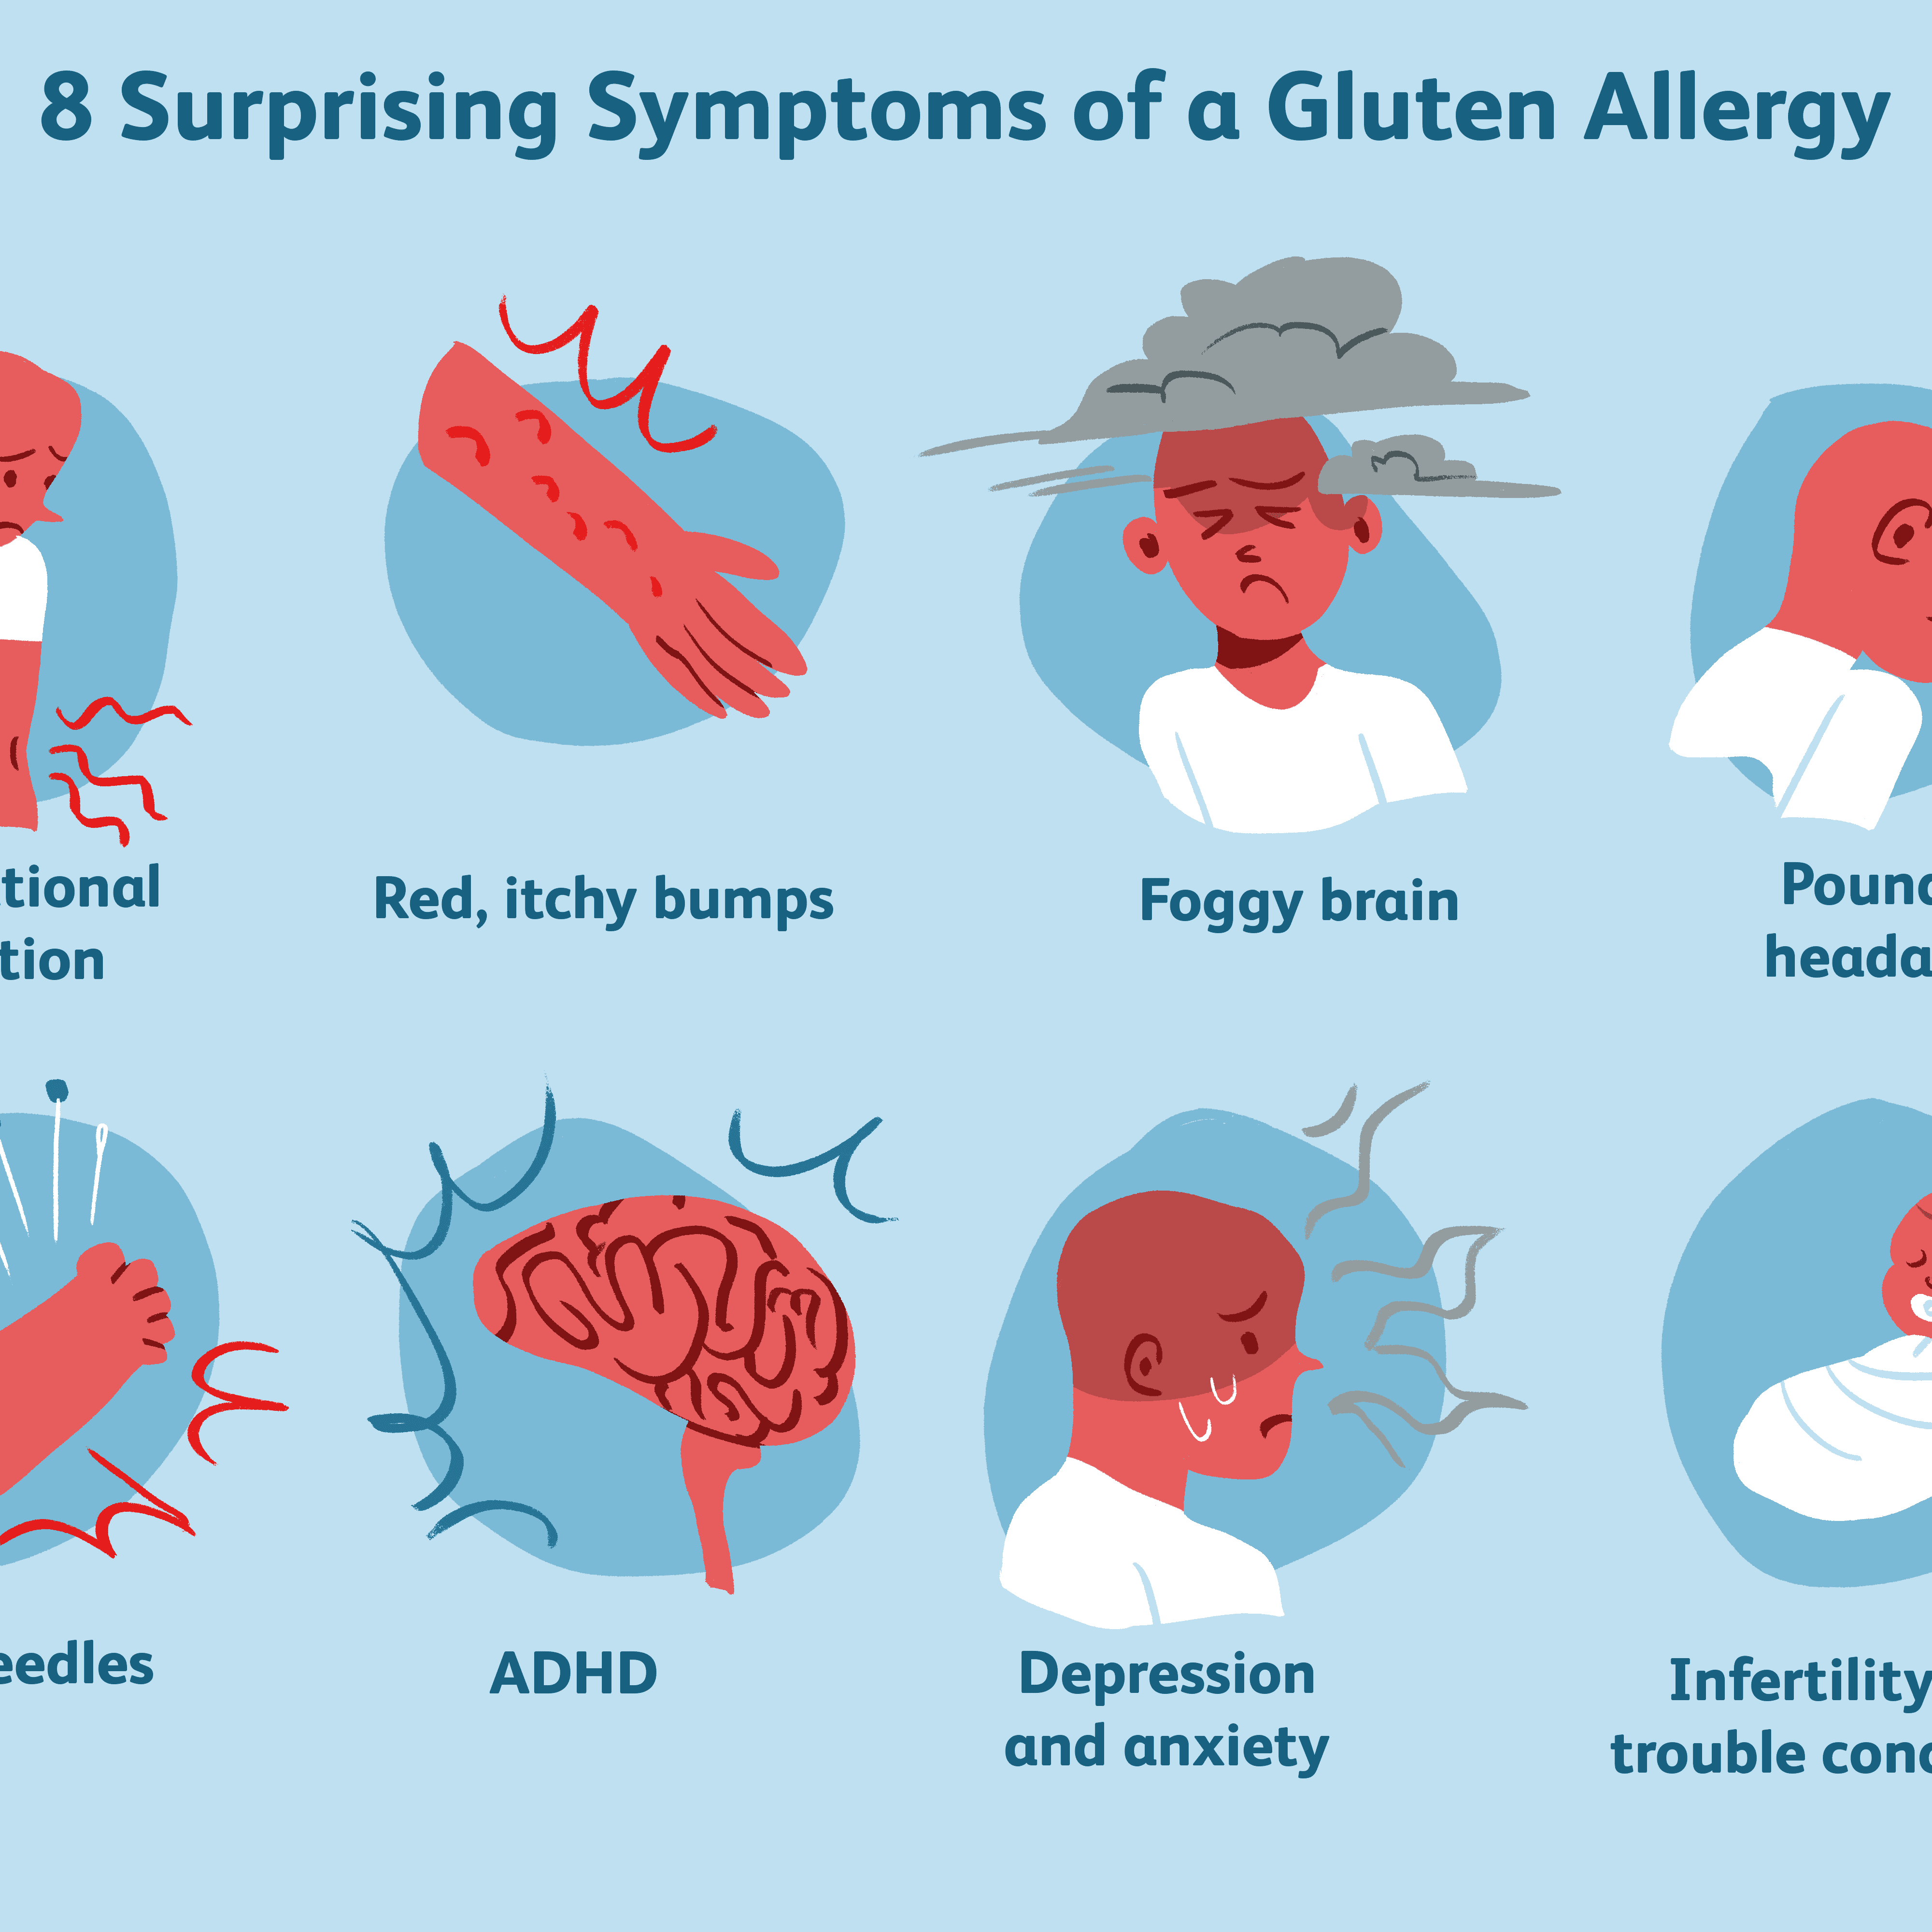 How To Know If You Have Celiac Disease Or Gluten Intolerance